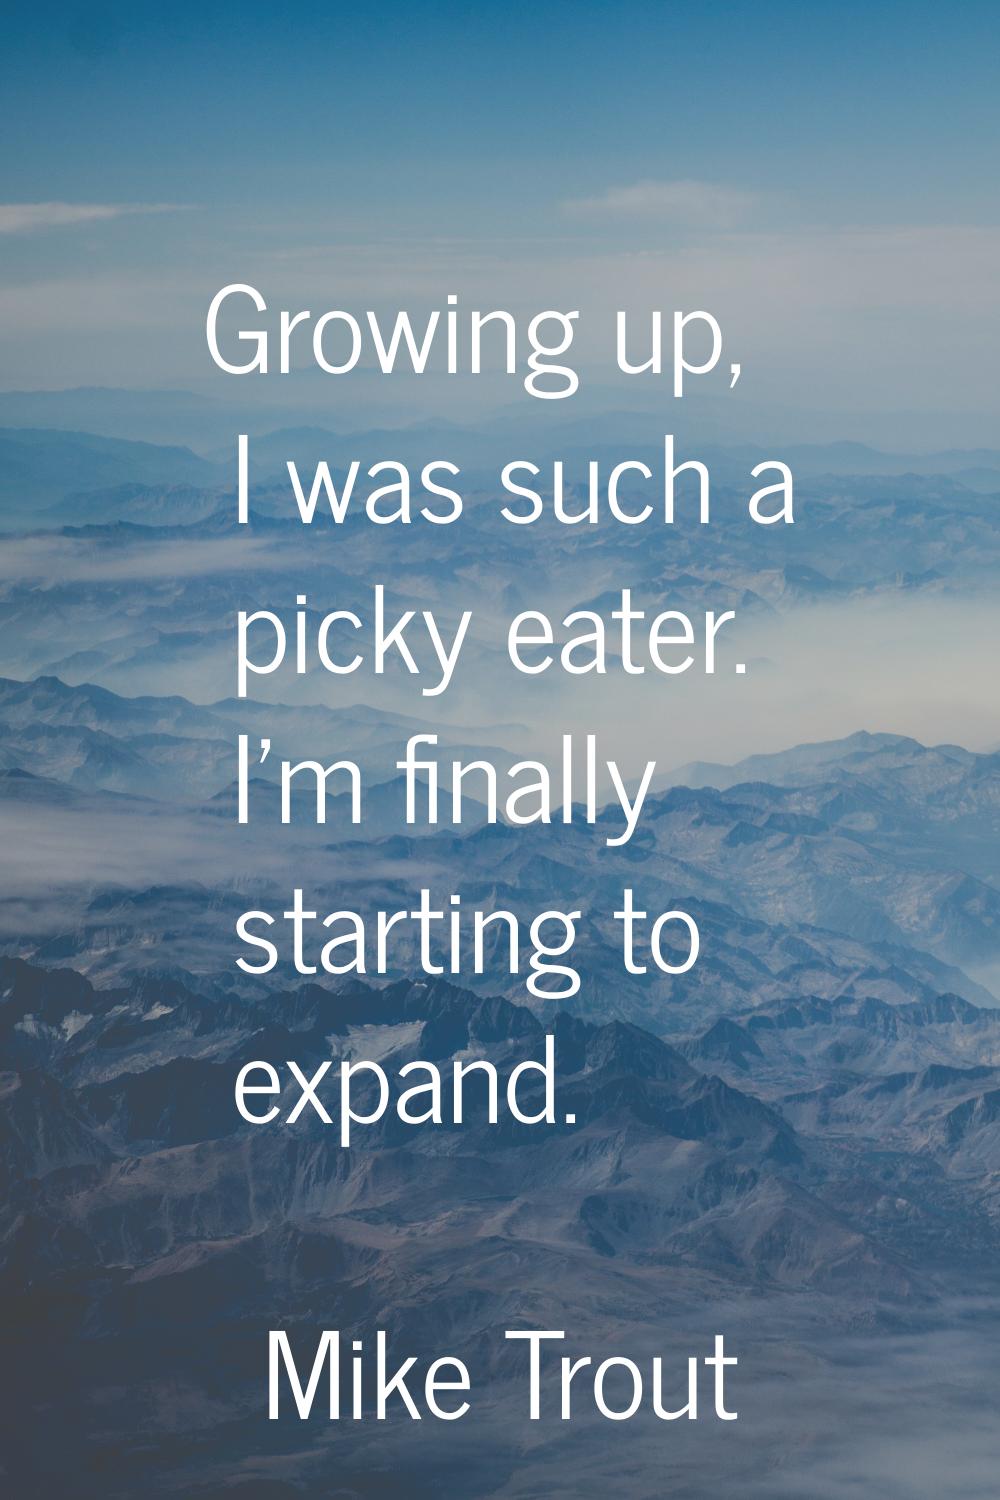 Growing up, I was such a picky eater. I'm finally starting to expand.